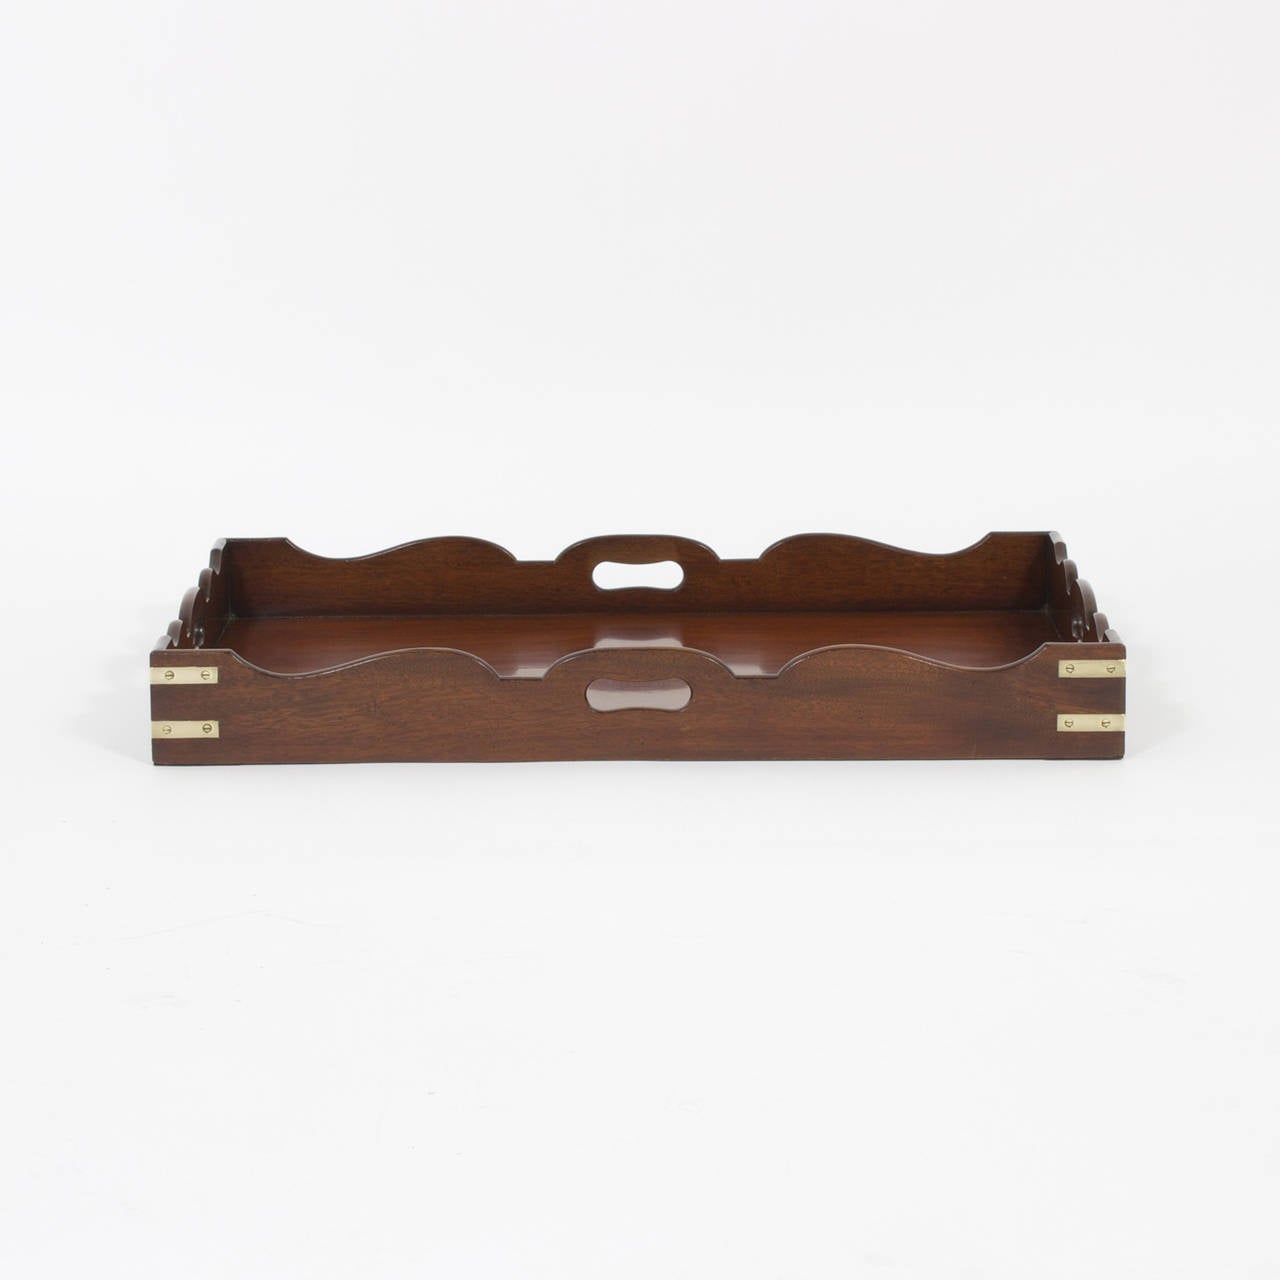 High quality mahogany campaign serving tray with scalloped edges and four open handles with campaign style corner brackets. All you need is a butler. Newly polished.
